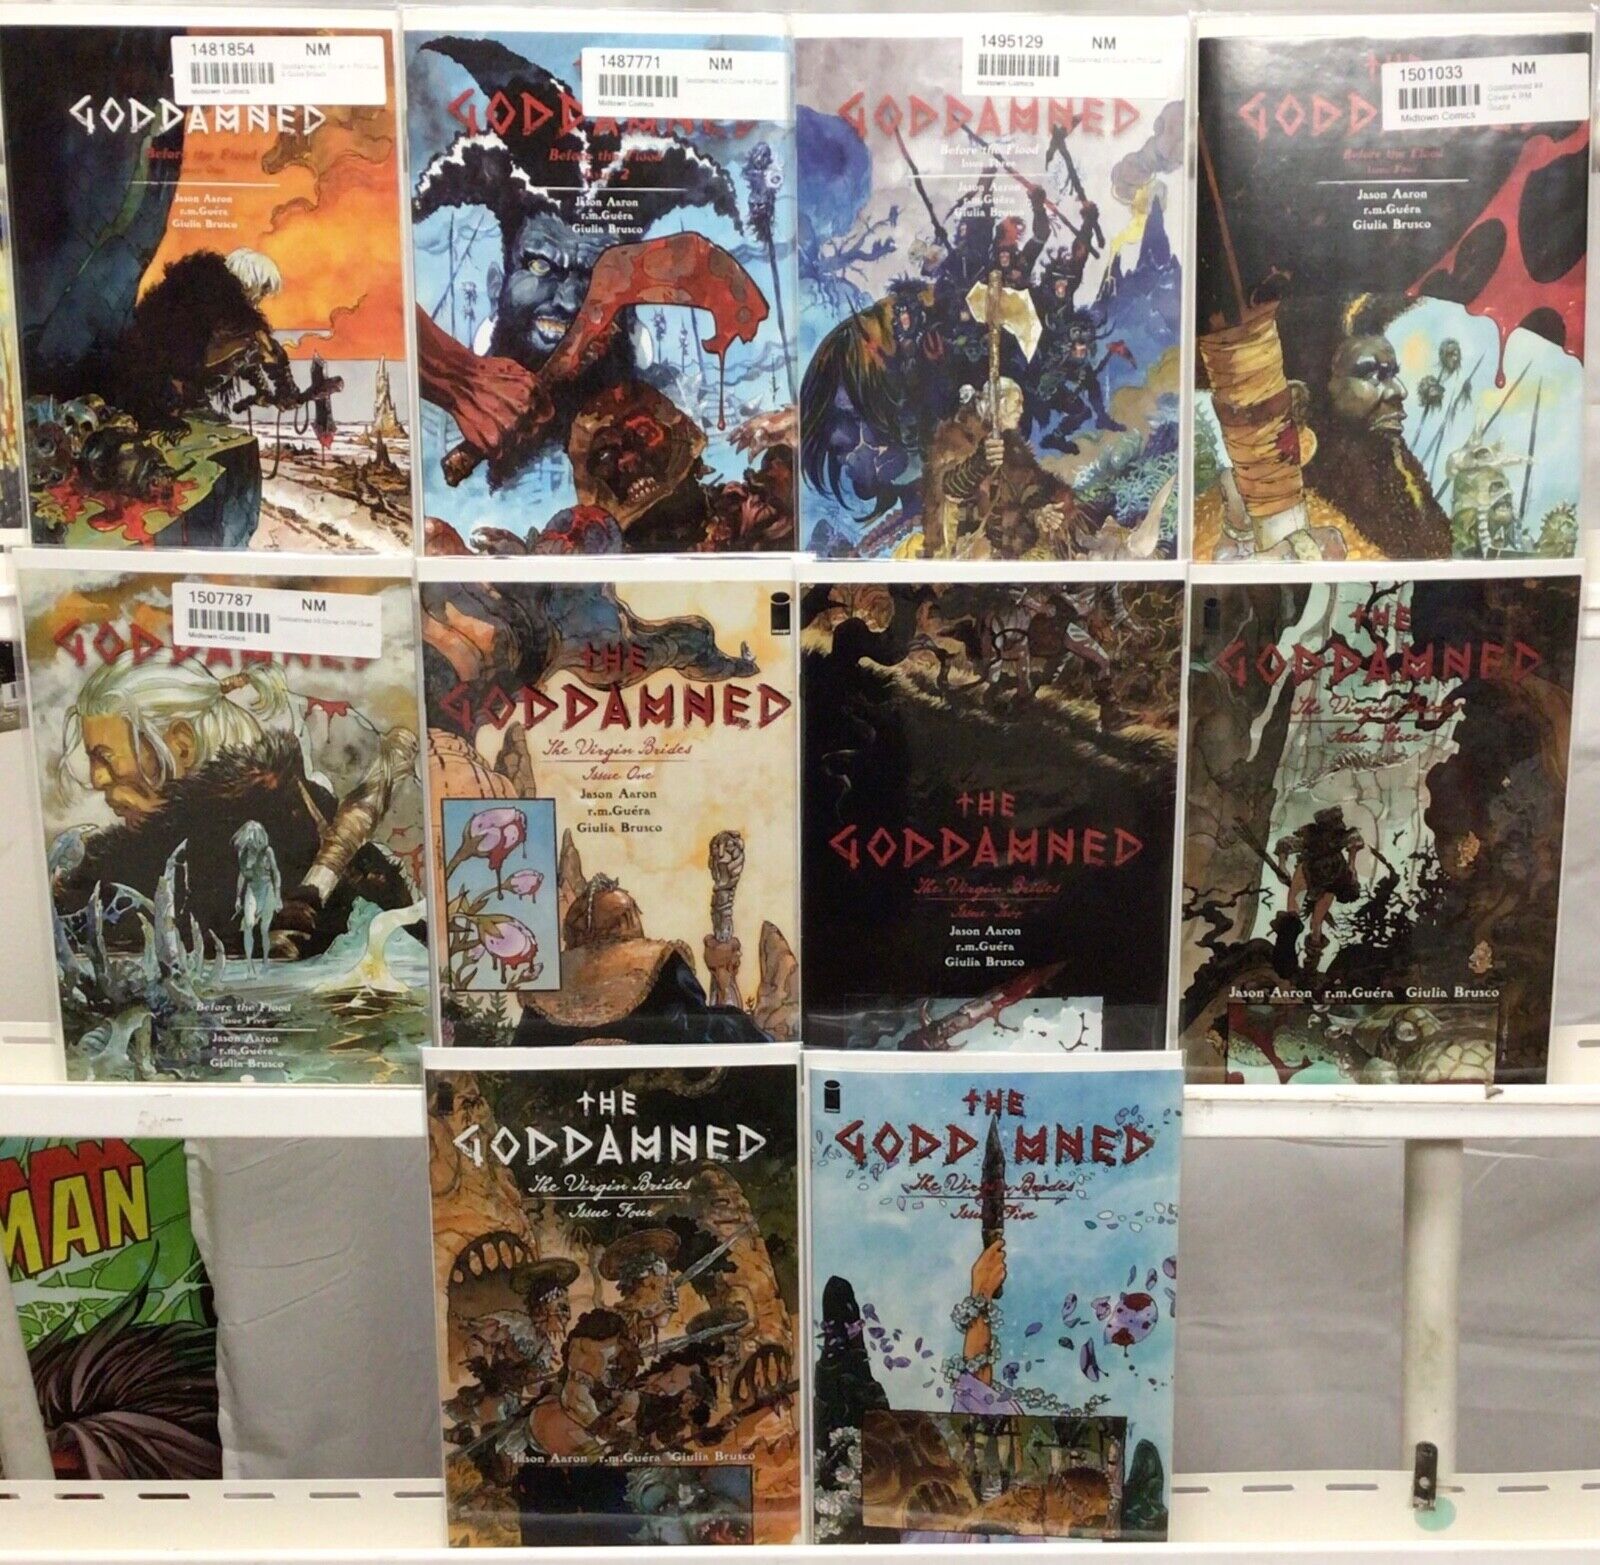 Image Comics The Goddamned Before the Flood / The Virgin Brides Complete Sets